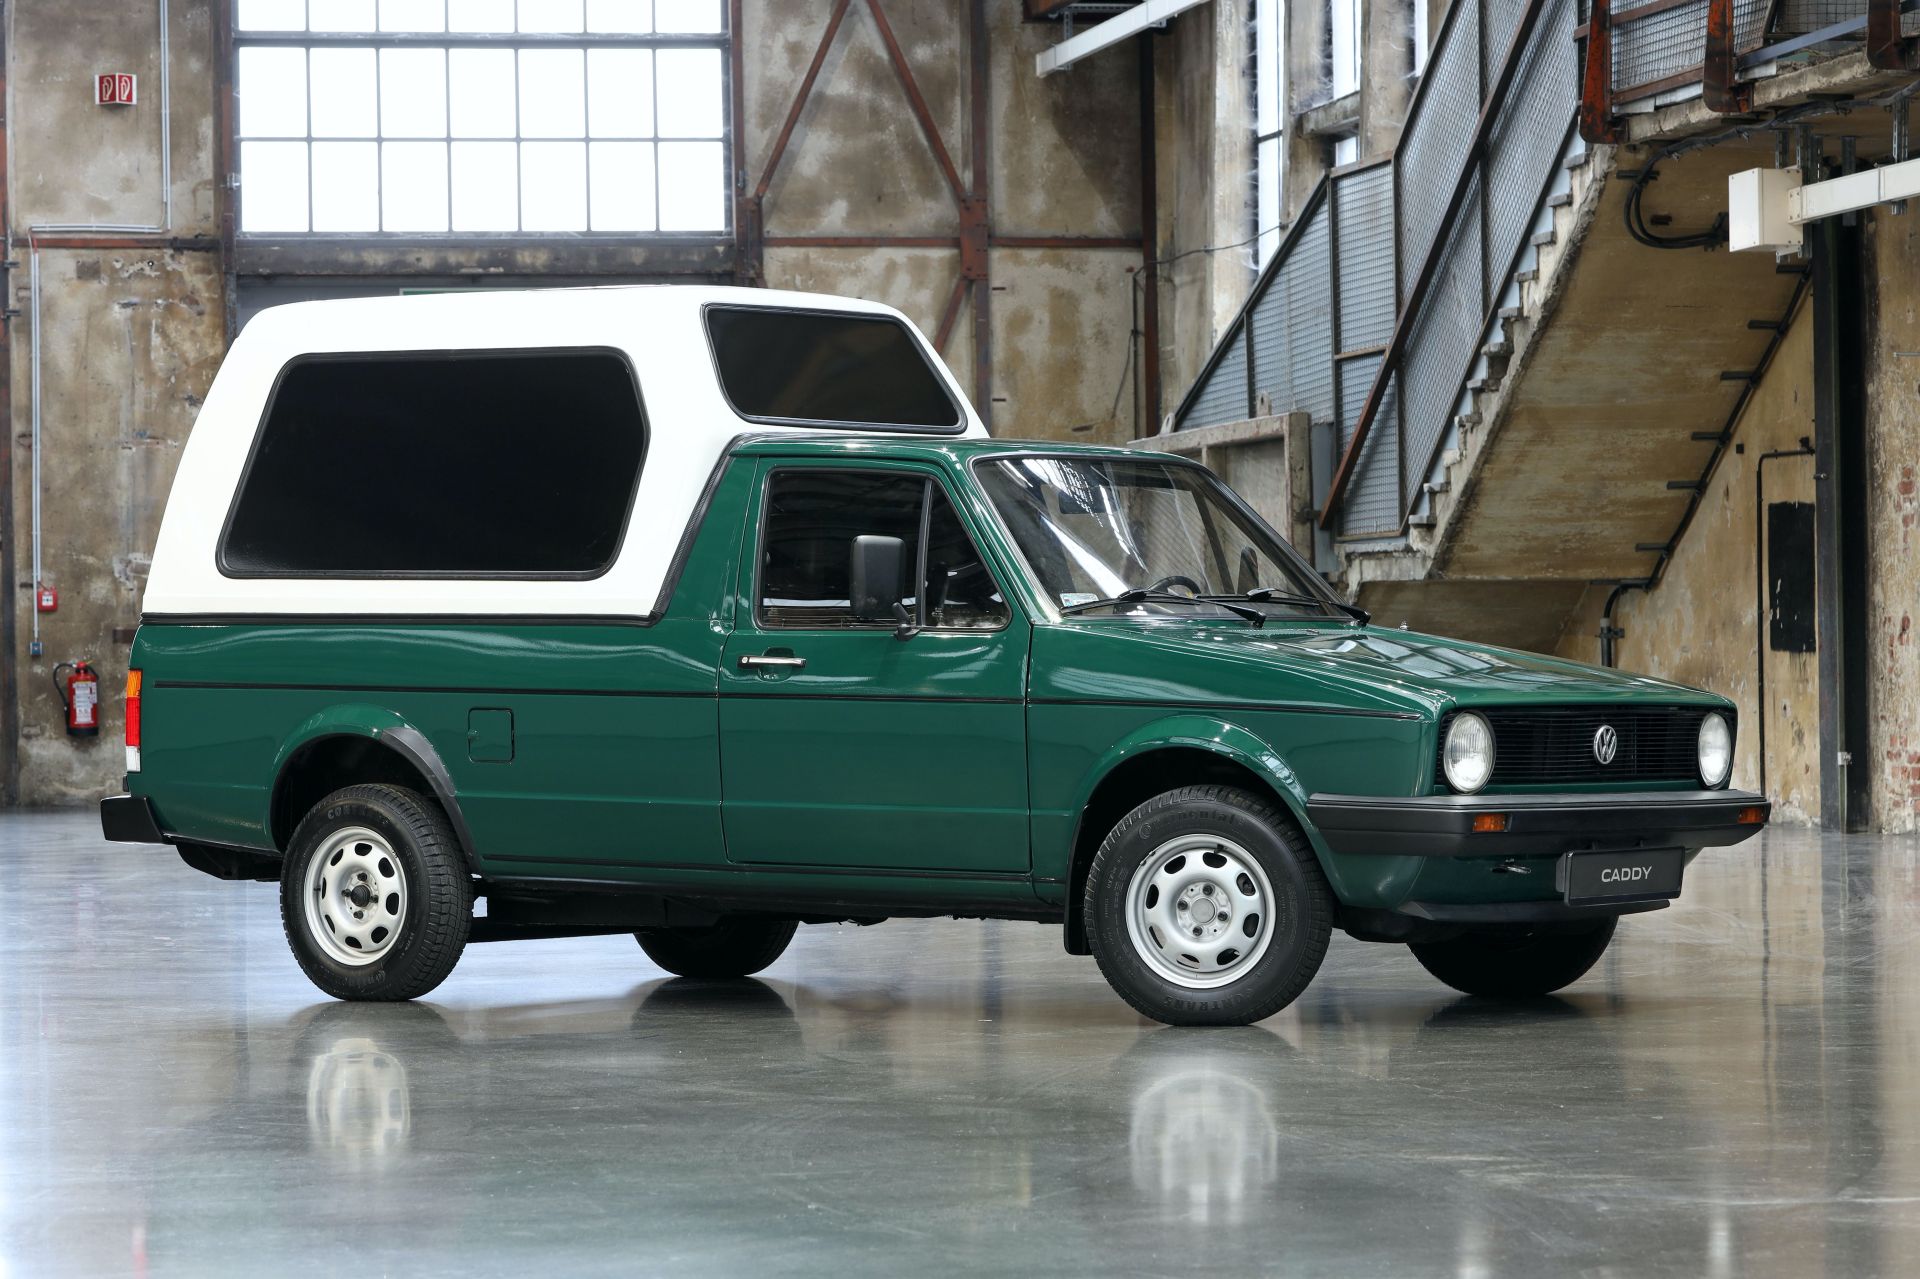 Throwback Saturday: The Evolution Of The VW Caddy Over Four Decades